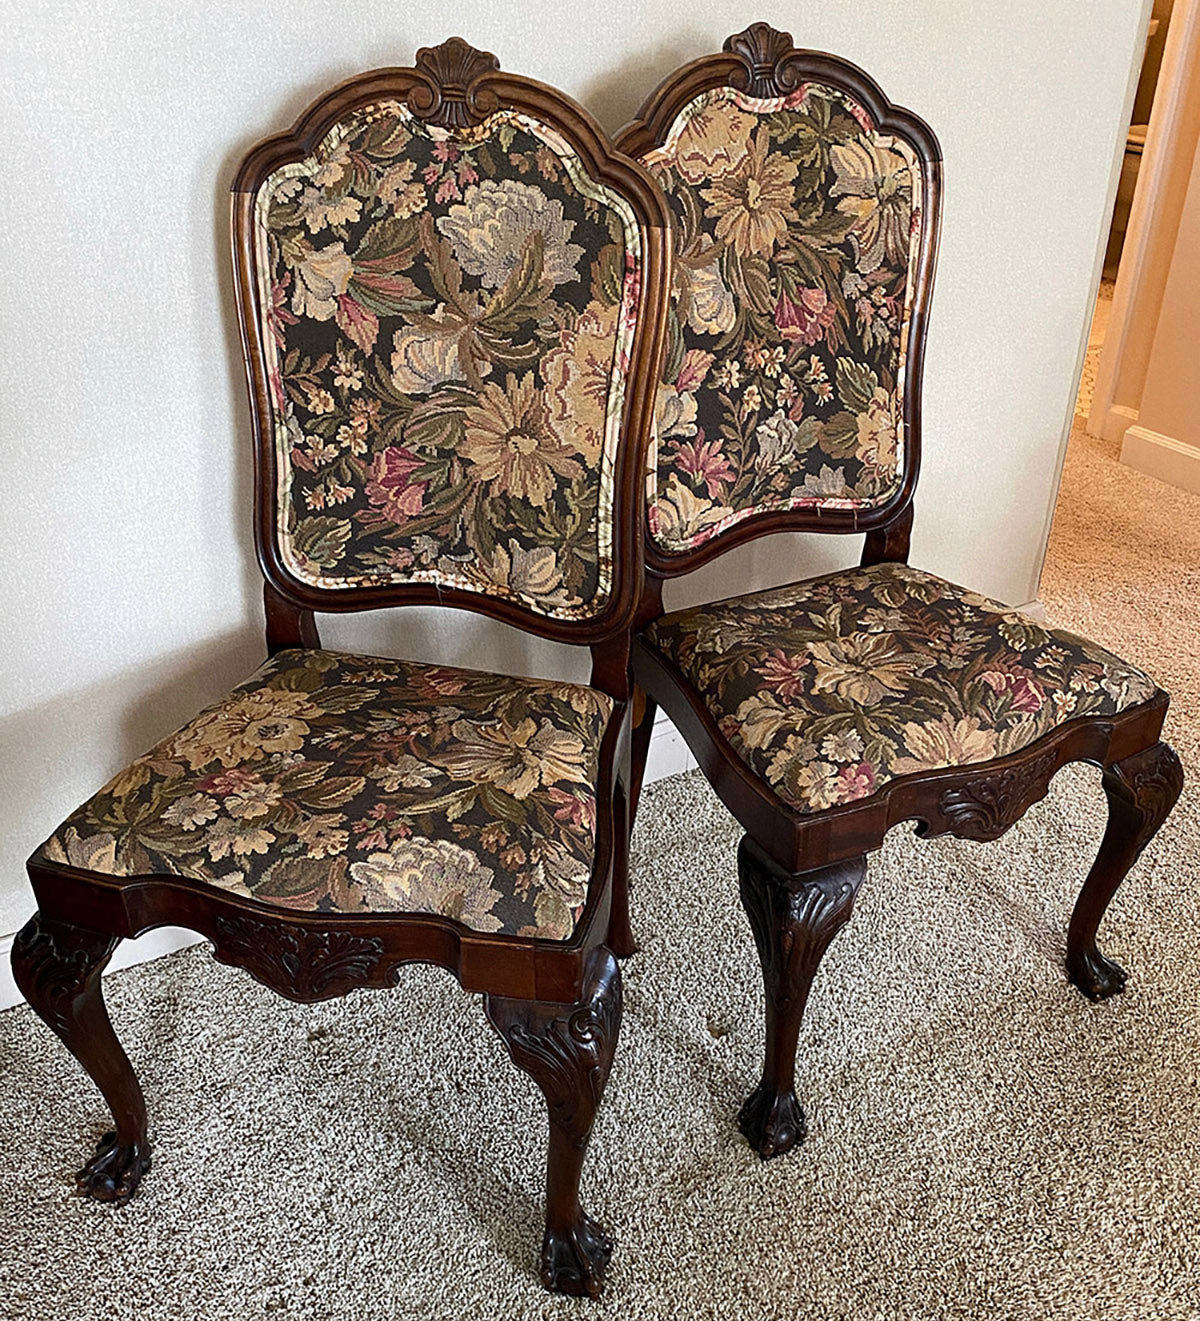 Antique pair of French Louis XV style side chairs.